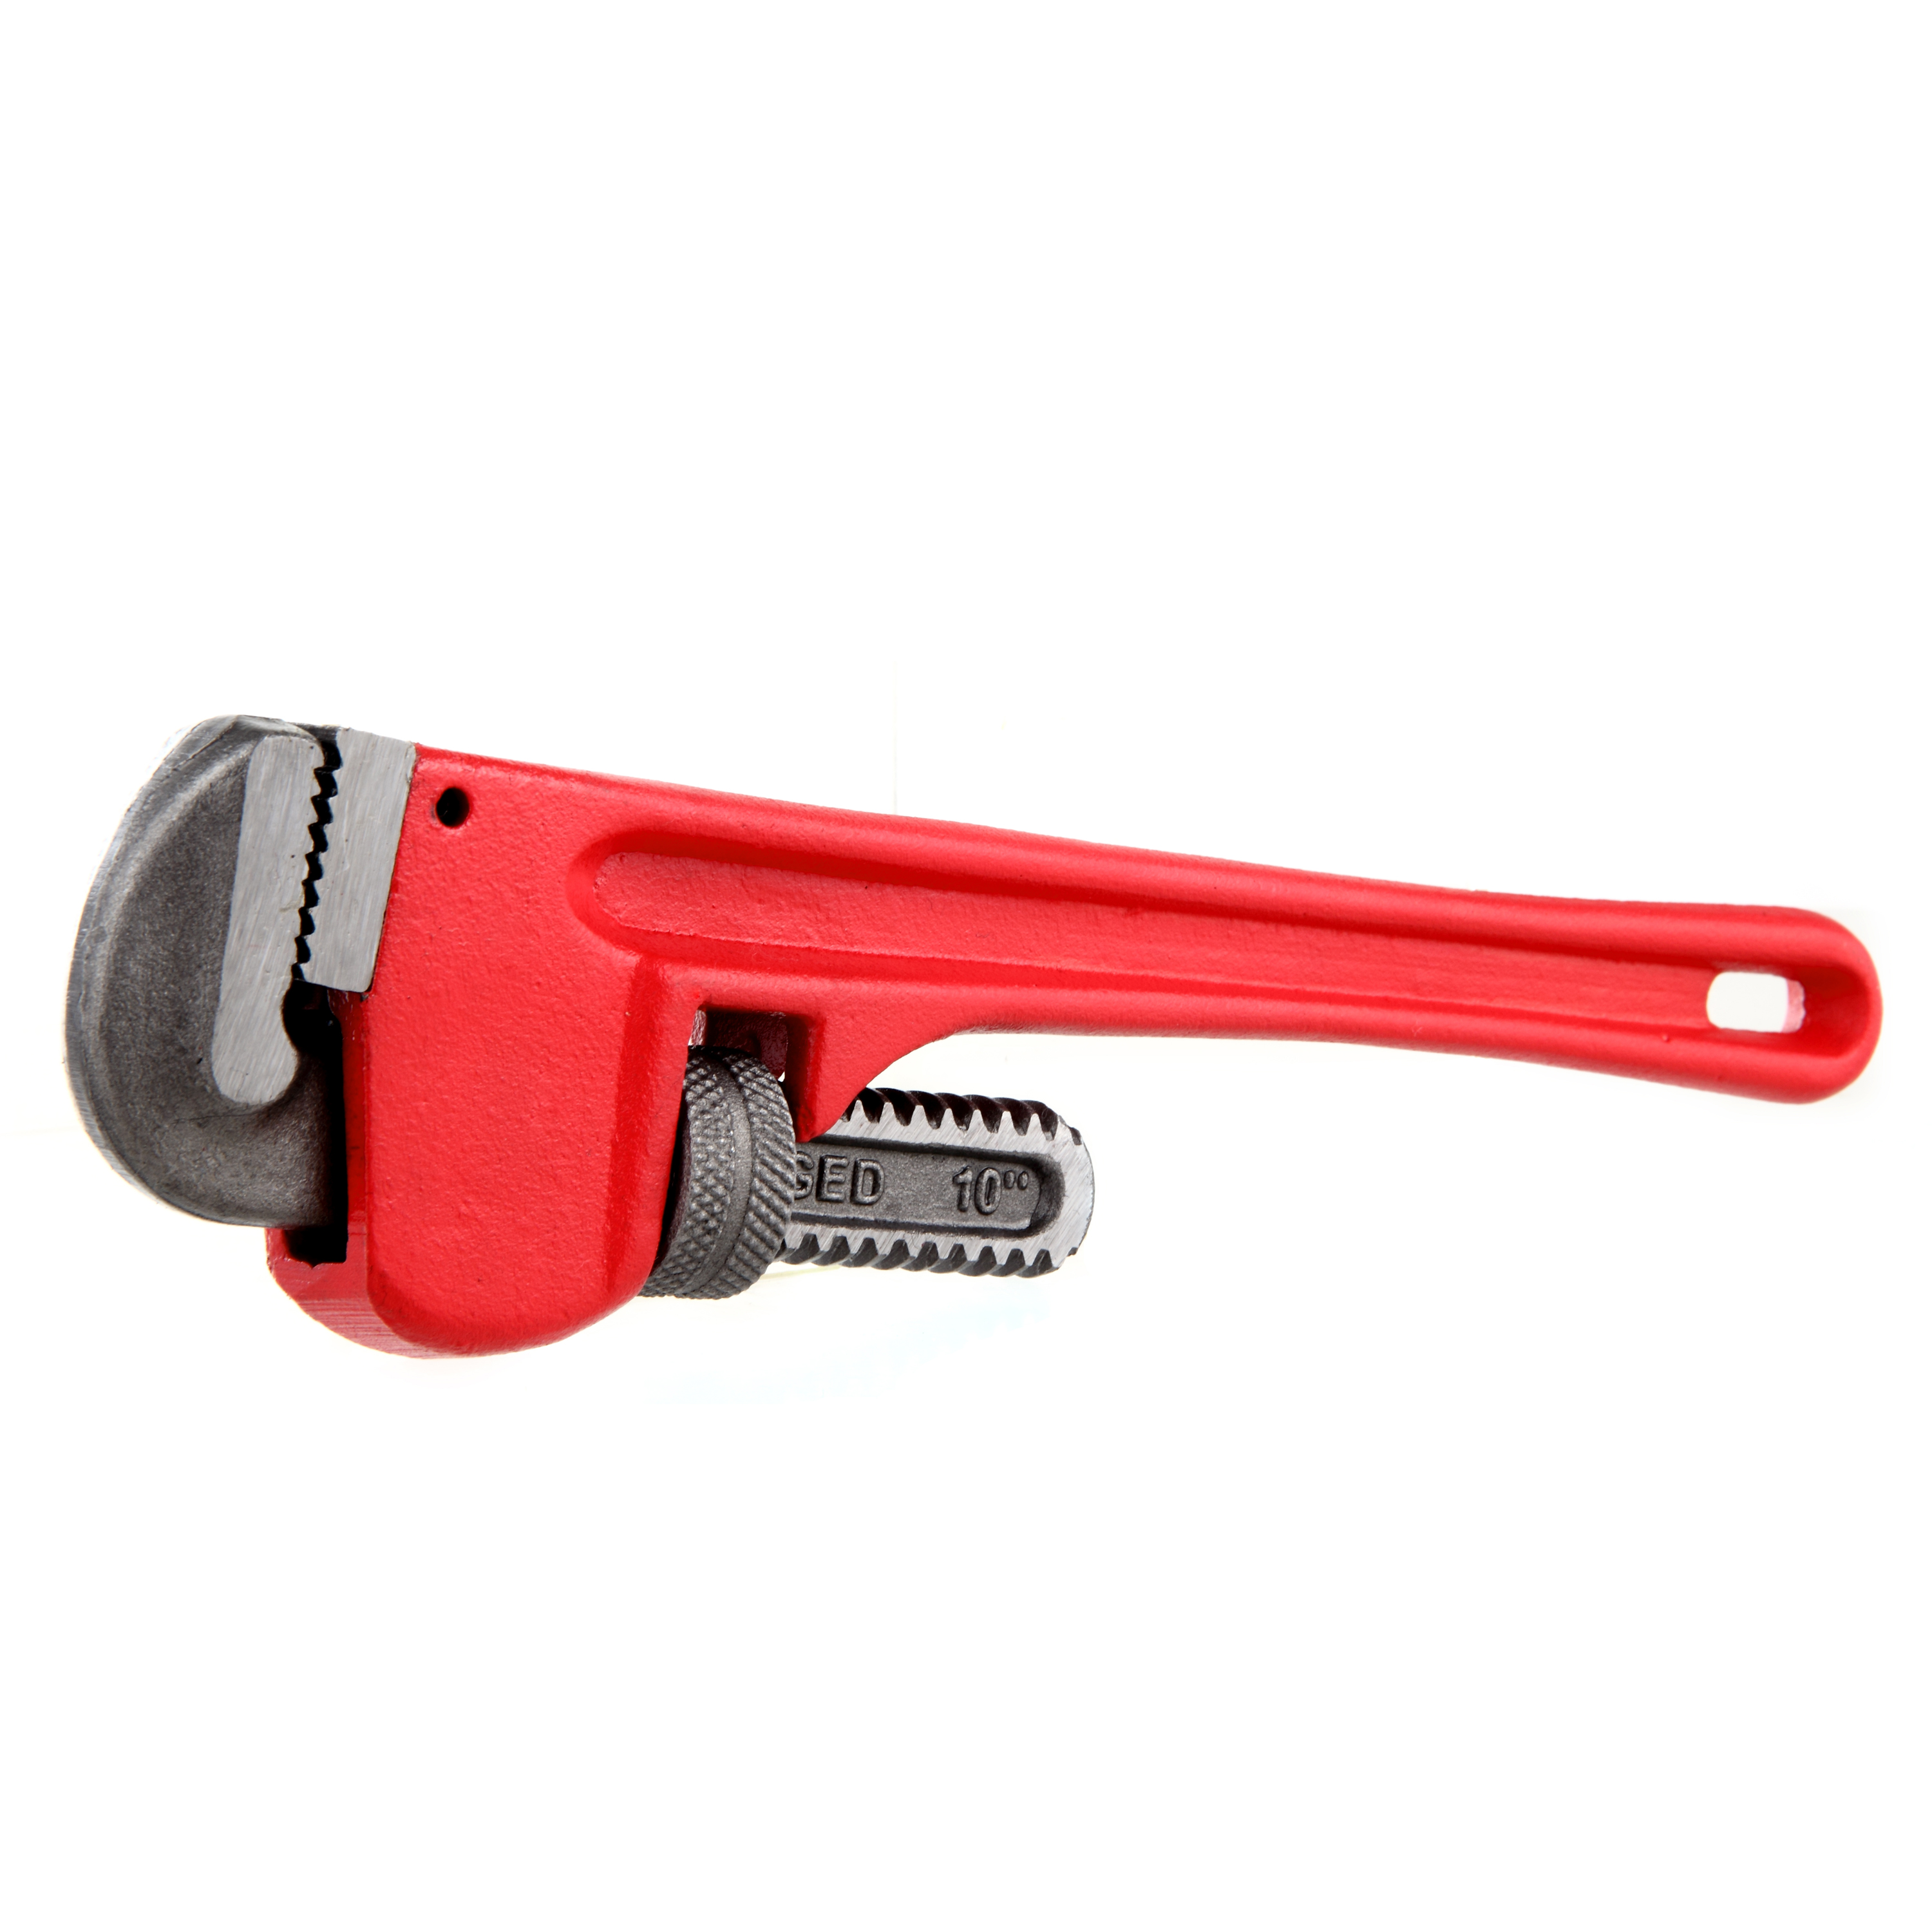 Hyper Tough UW40086A 10 Inch Cast Iron Pipe Wrench With Offset Jaws ...